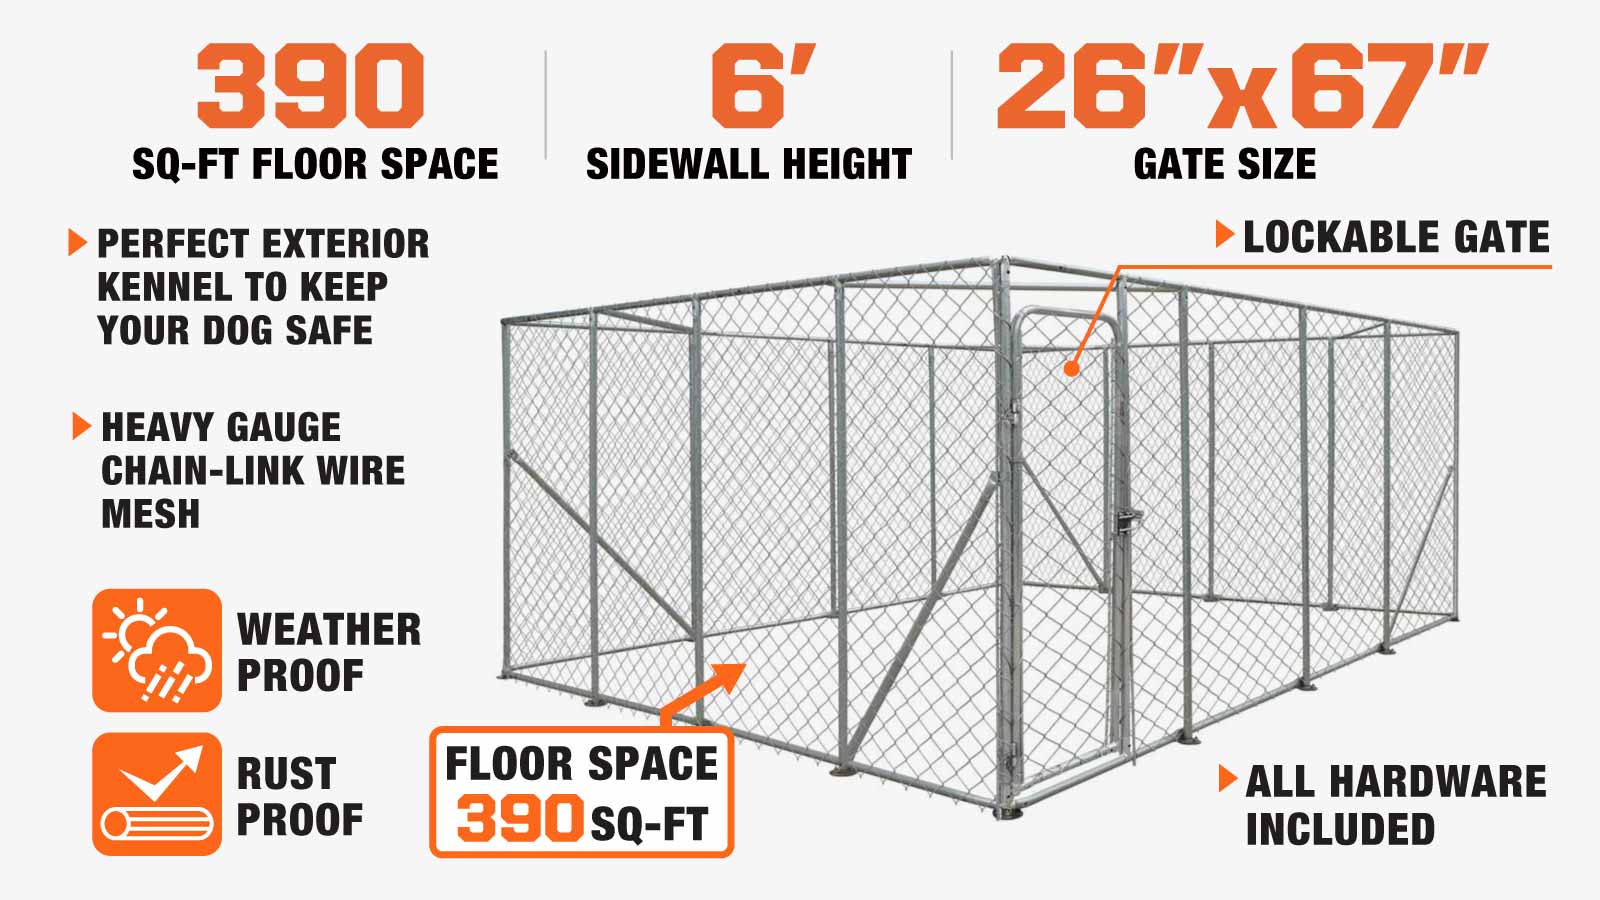 TMG Industrial 20’ x 20’ Outdoor Dog Kennel Playpen, Outdoor Dog Runner, Pet Exercise House, Lockable Gate, 6’ Chain-Link Fence, TMG-DCP2020-description-image